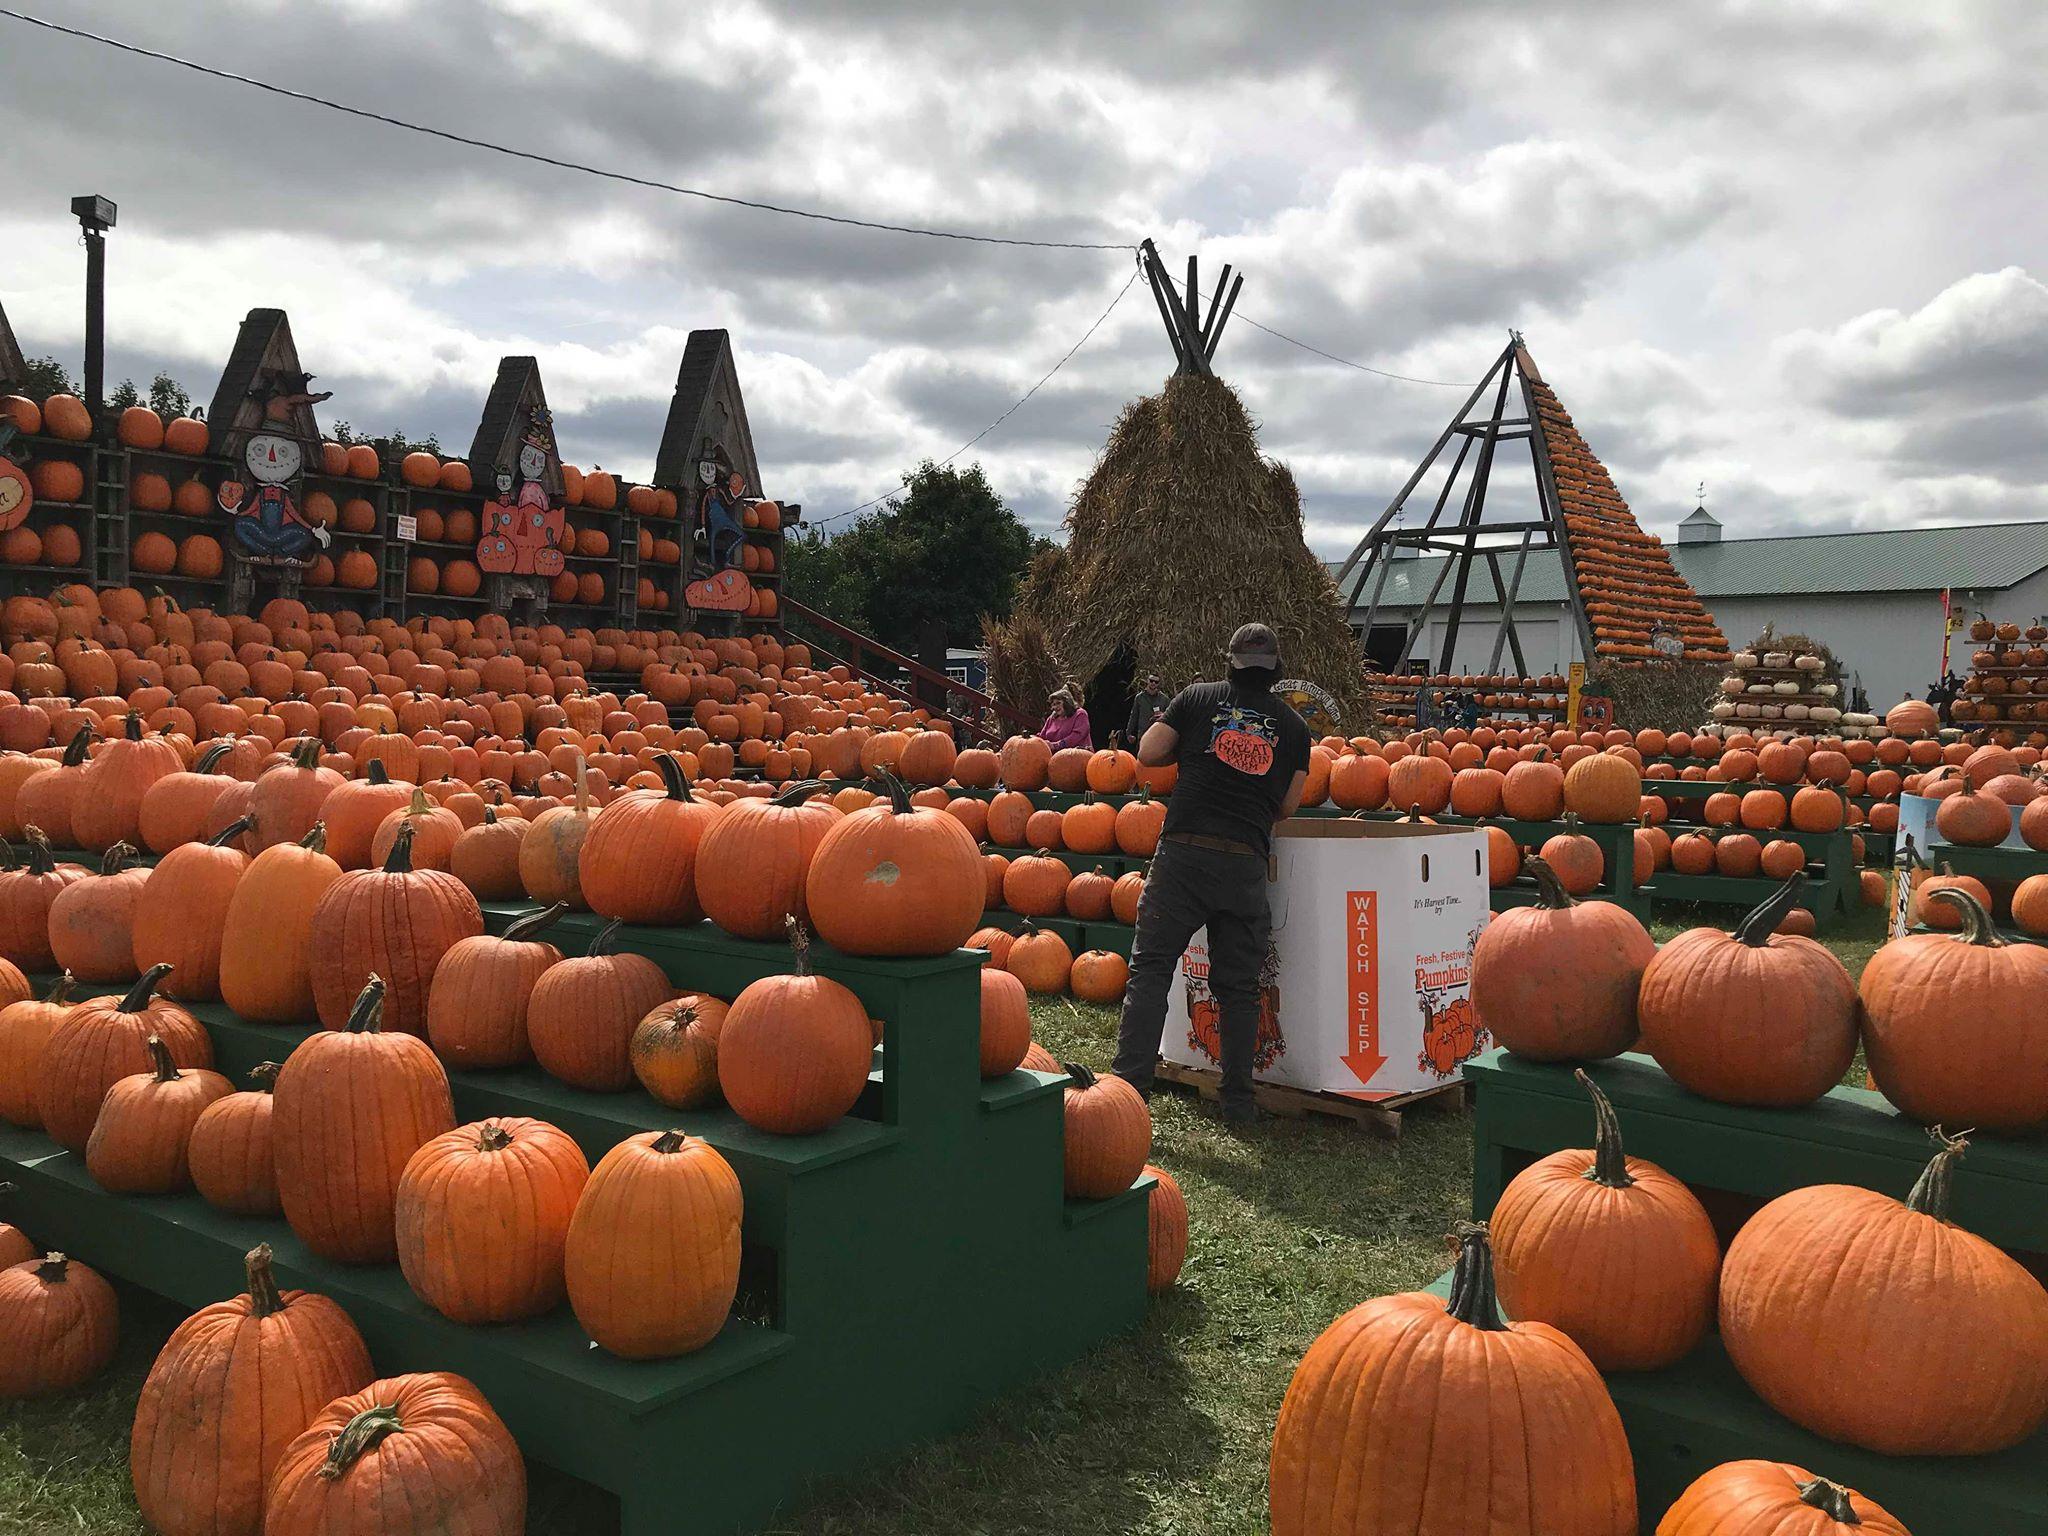 My Experience at The Great Pumpkin Farm